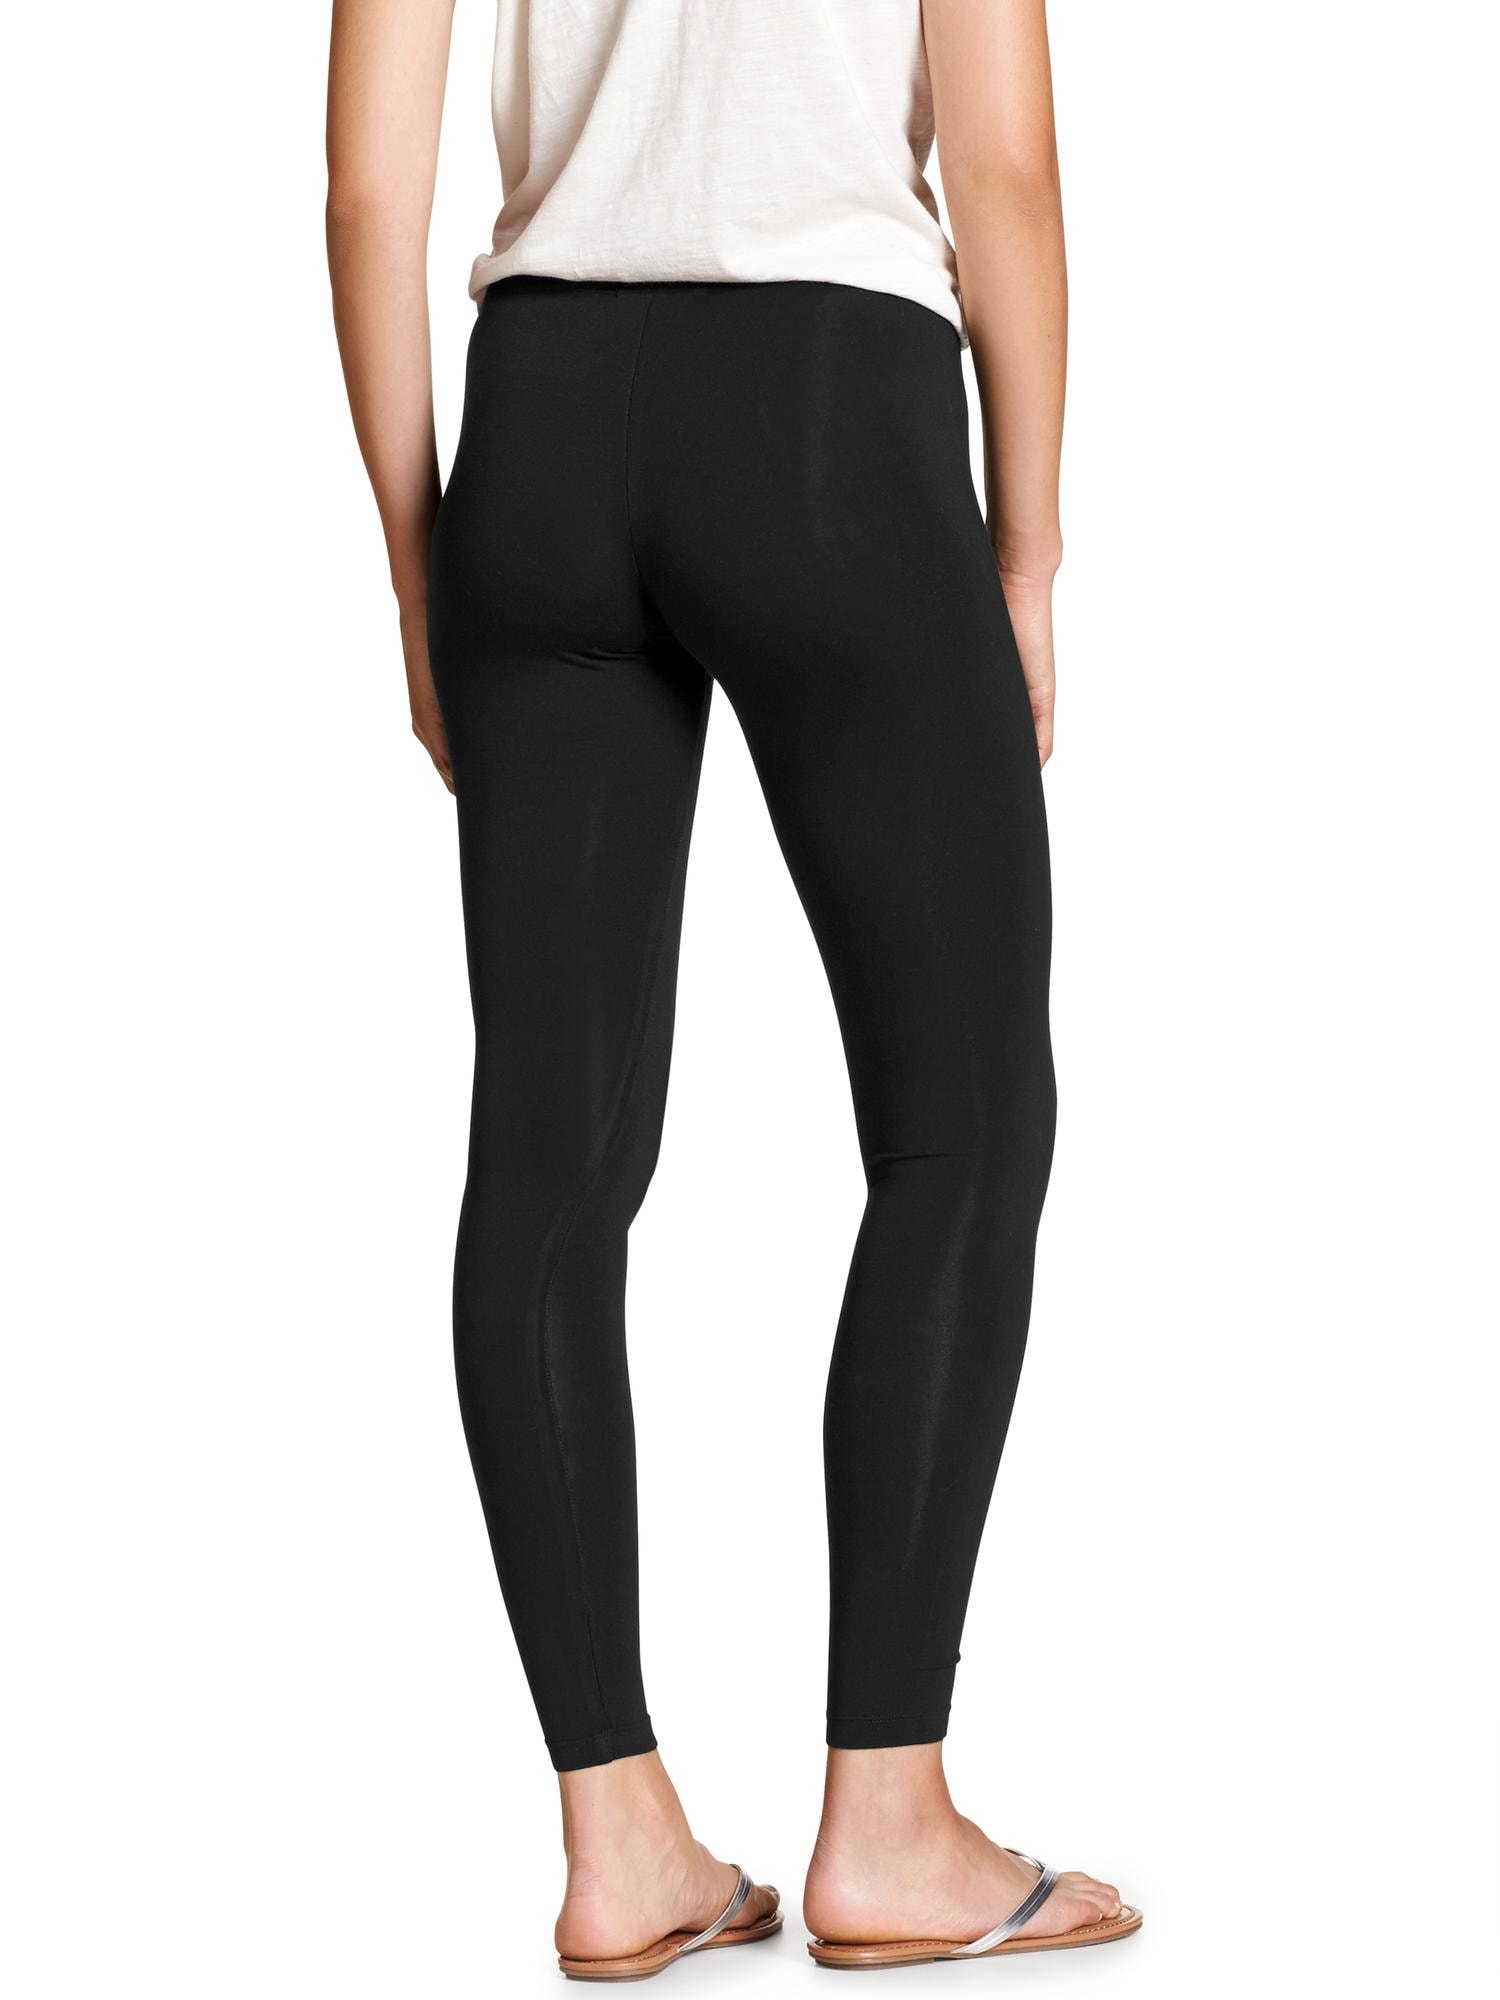 Banana Republic Legging  Banana republic leggings, Leggings are not pants,  Clothes design